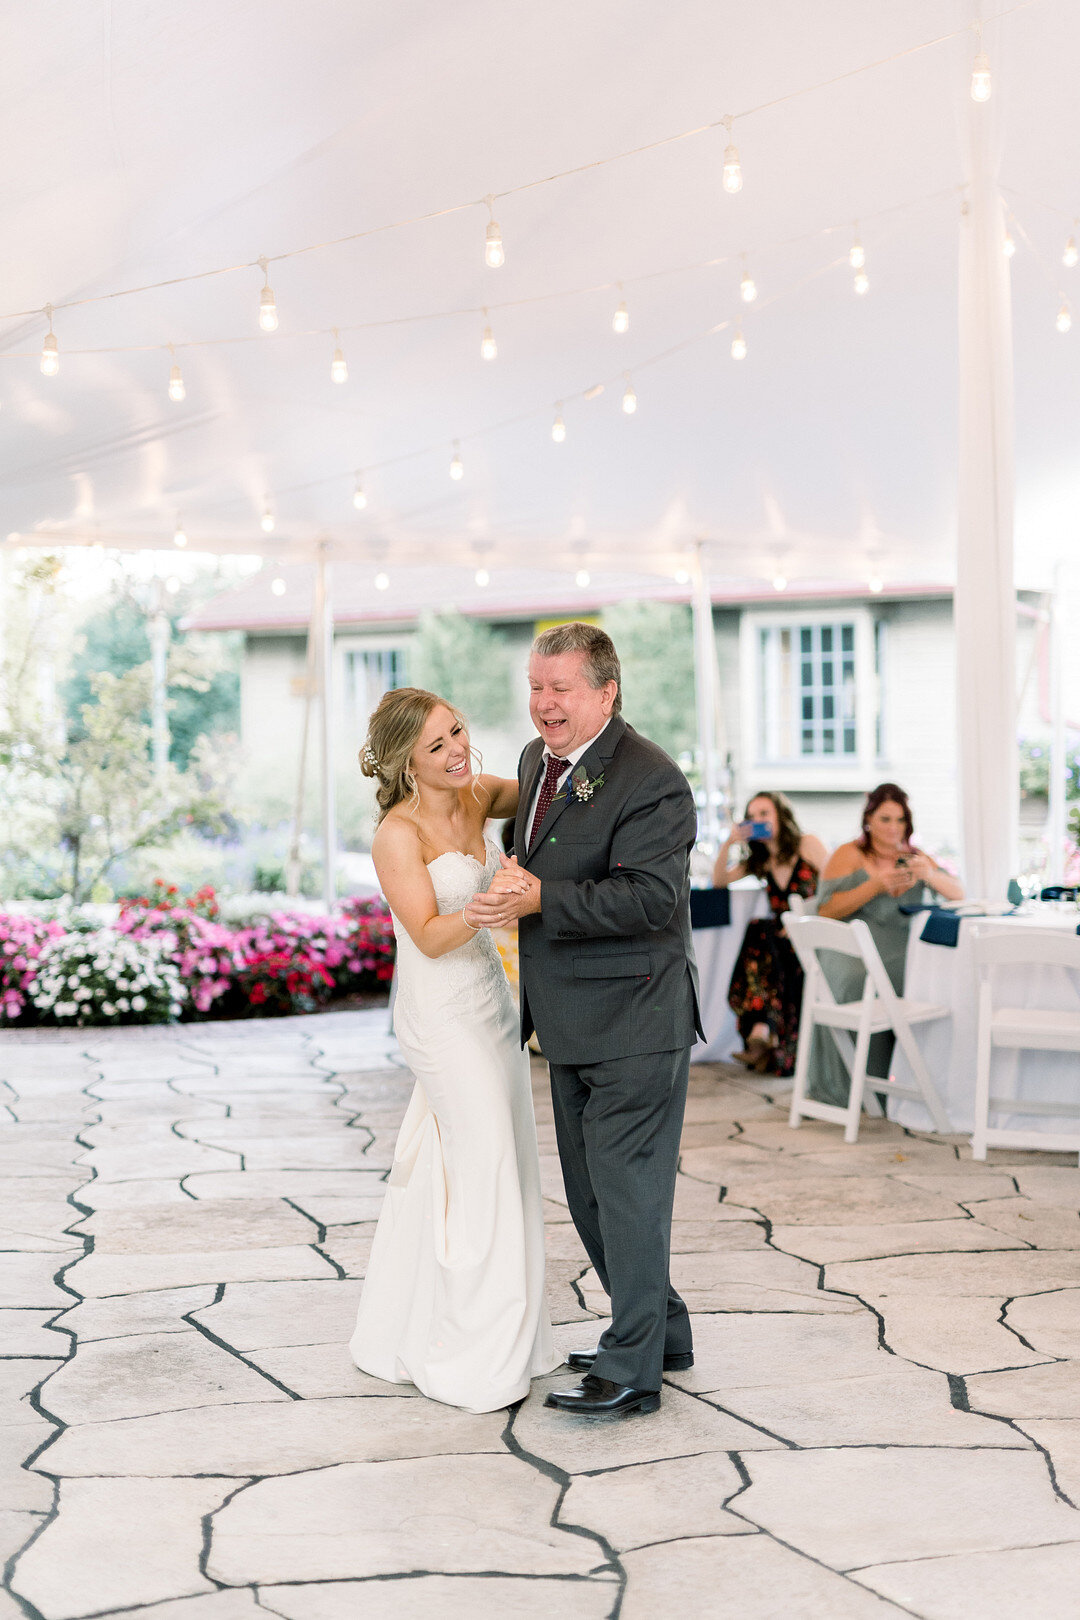 When faced with having to move their entire wedding from Boston to Pennsylvania, Kim and Kyle never expected to find a new vendor team and location in just two weeks but luck came through and they found the perfect team of vendors and a new venue to…